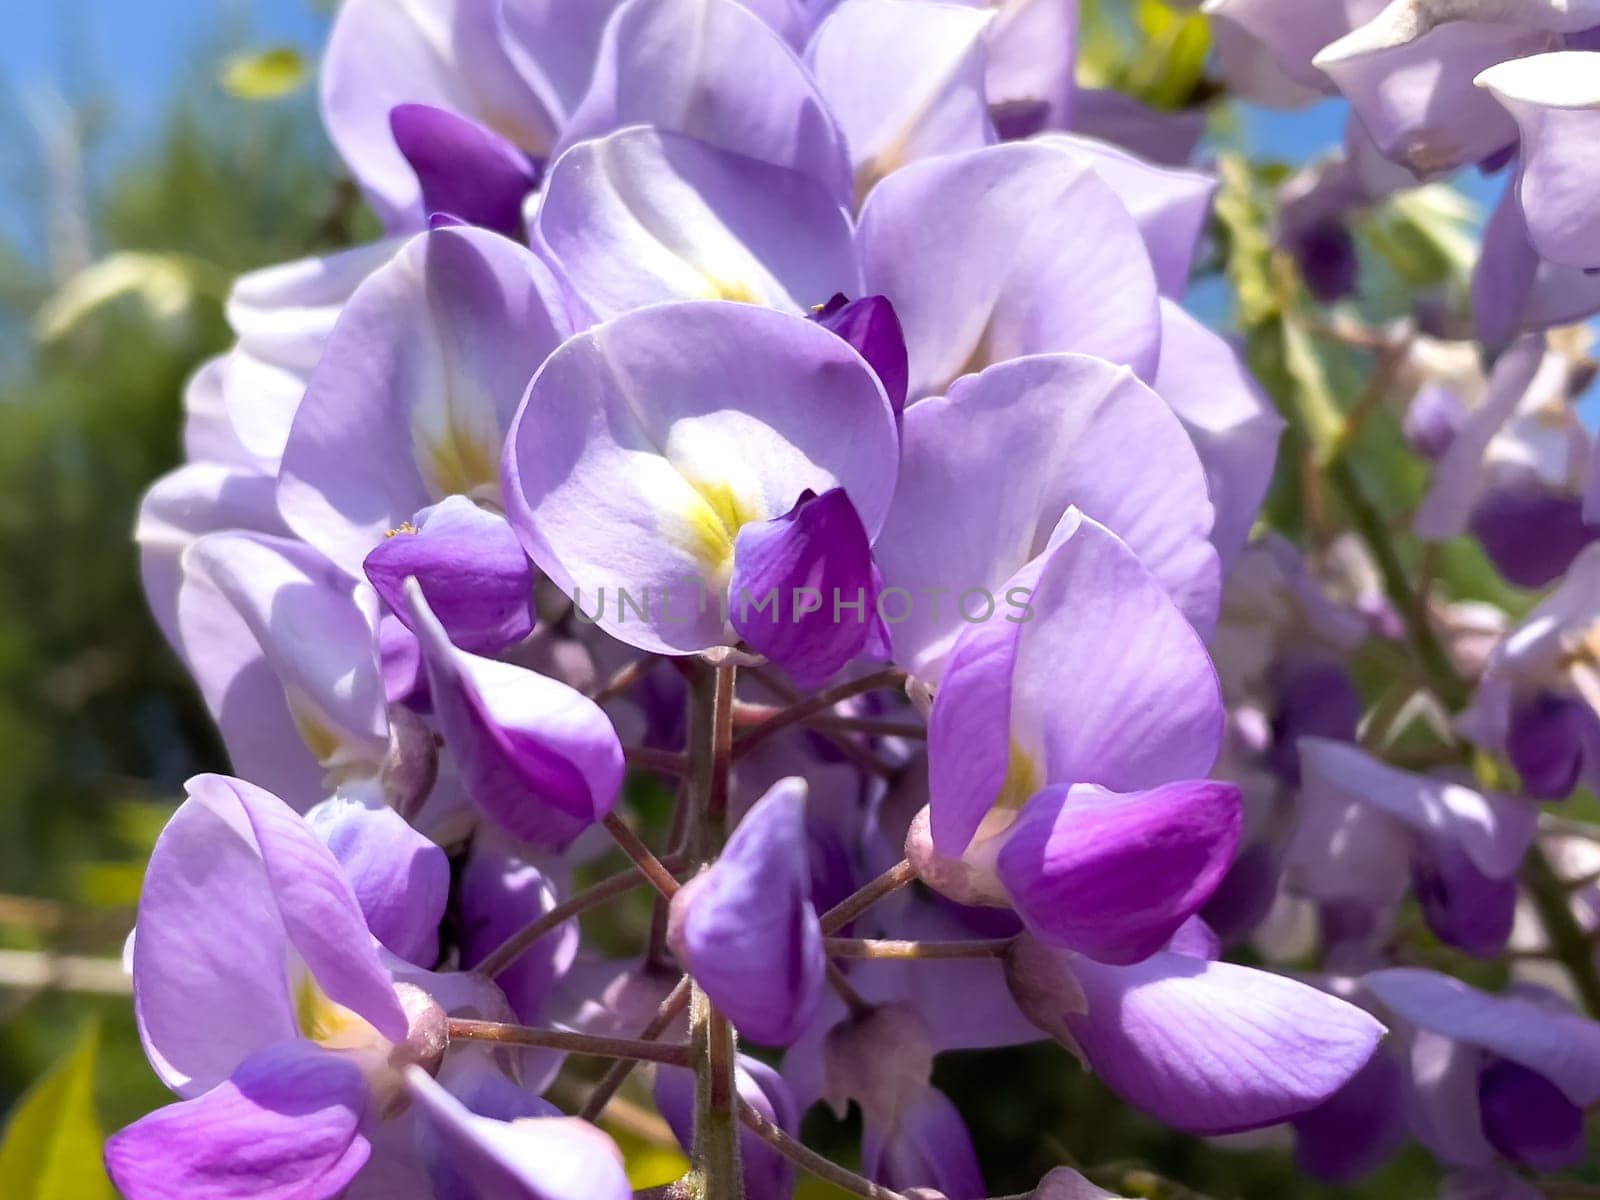 Blooming Wisteria Sinensis with scented classic purple flowersin full bloom in hanging racemes on the wind closeup. Garden with wisteria in spring